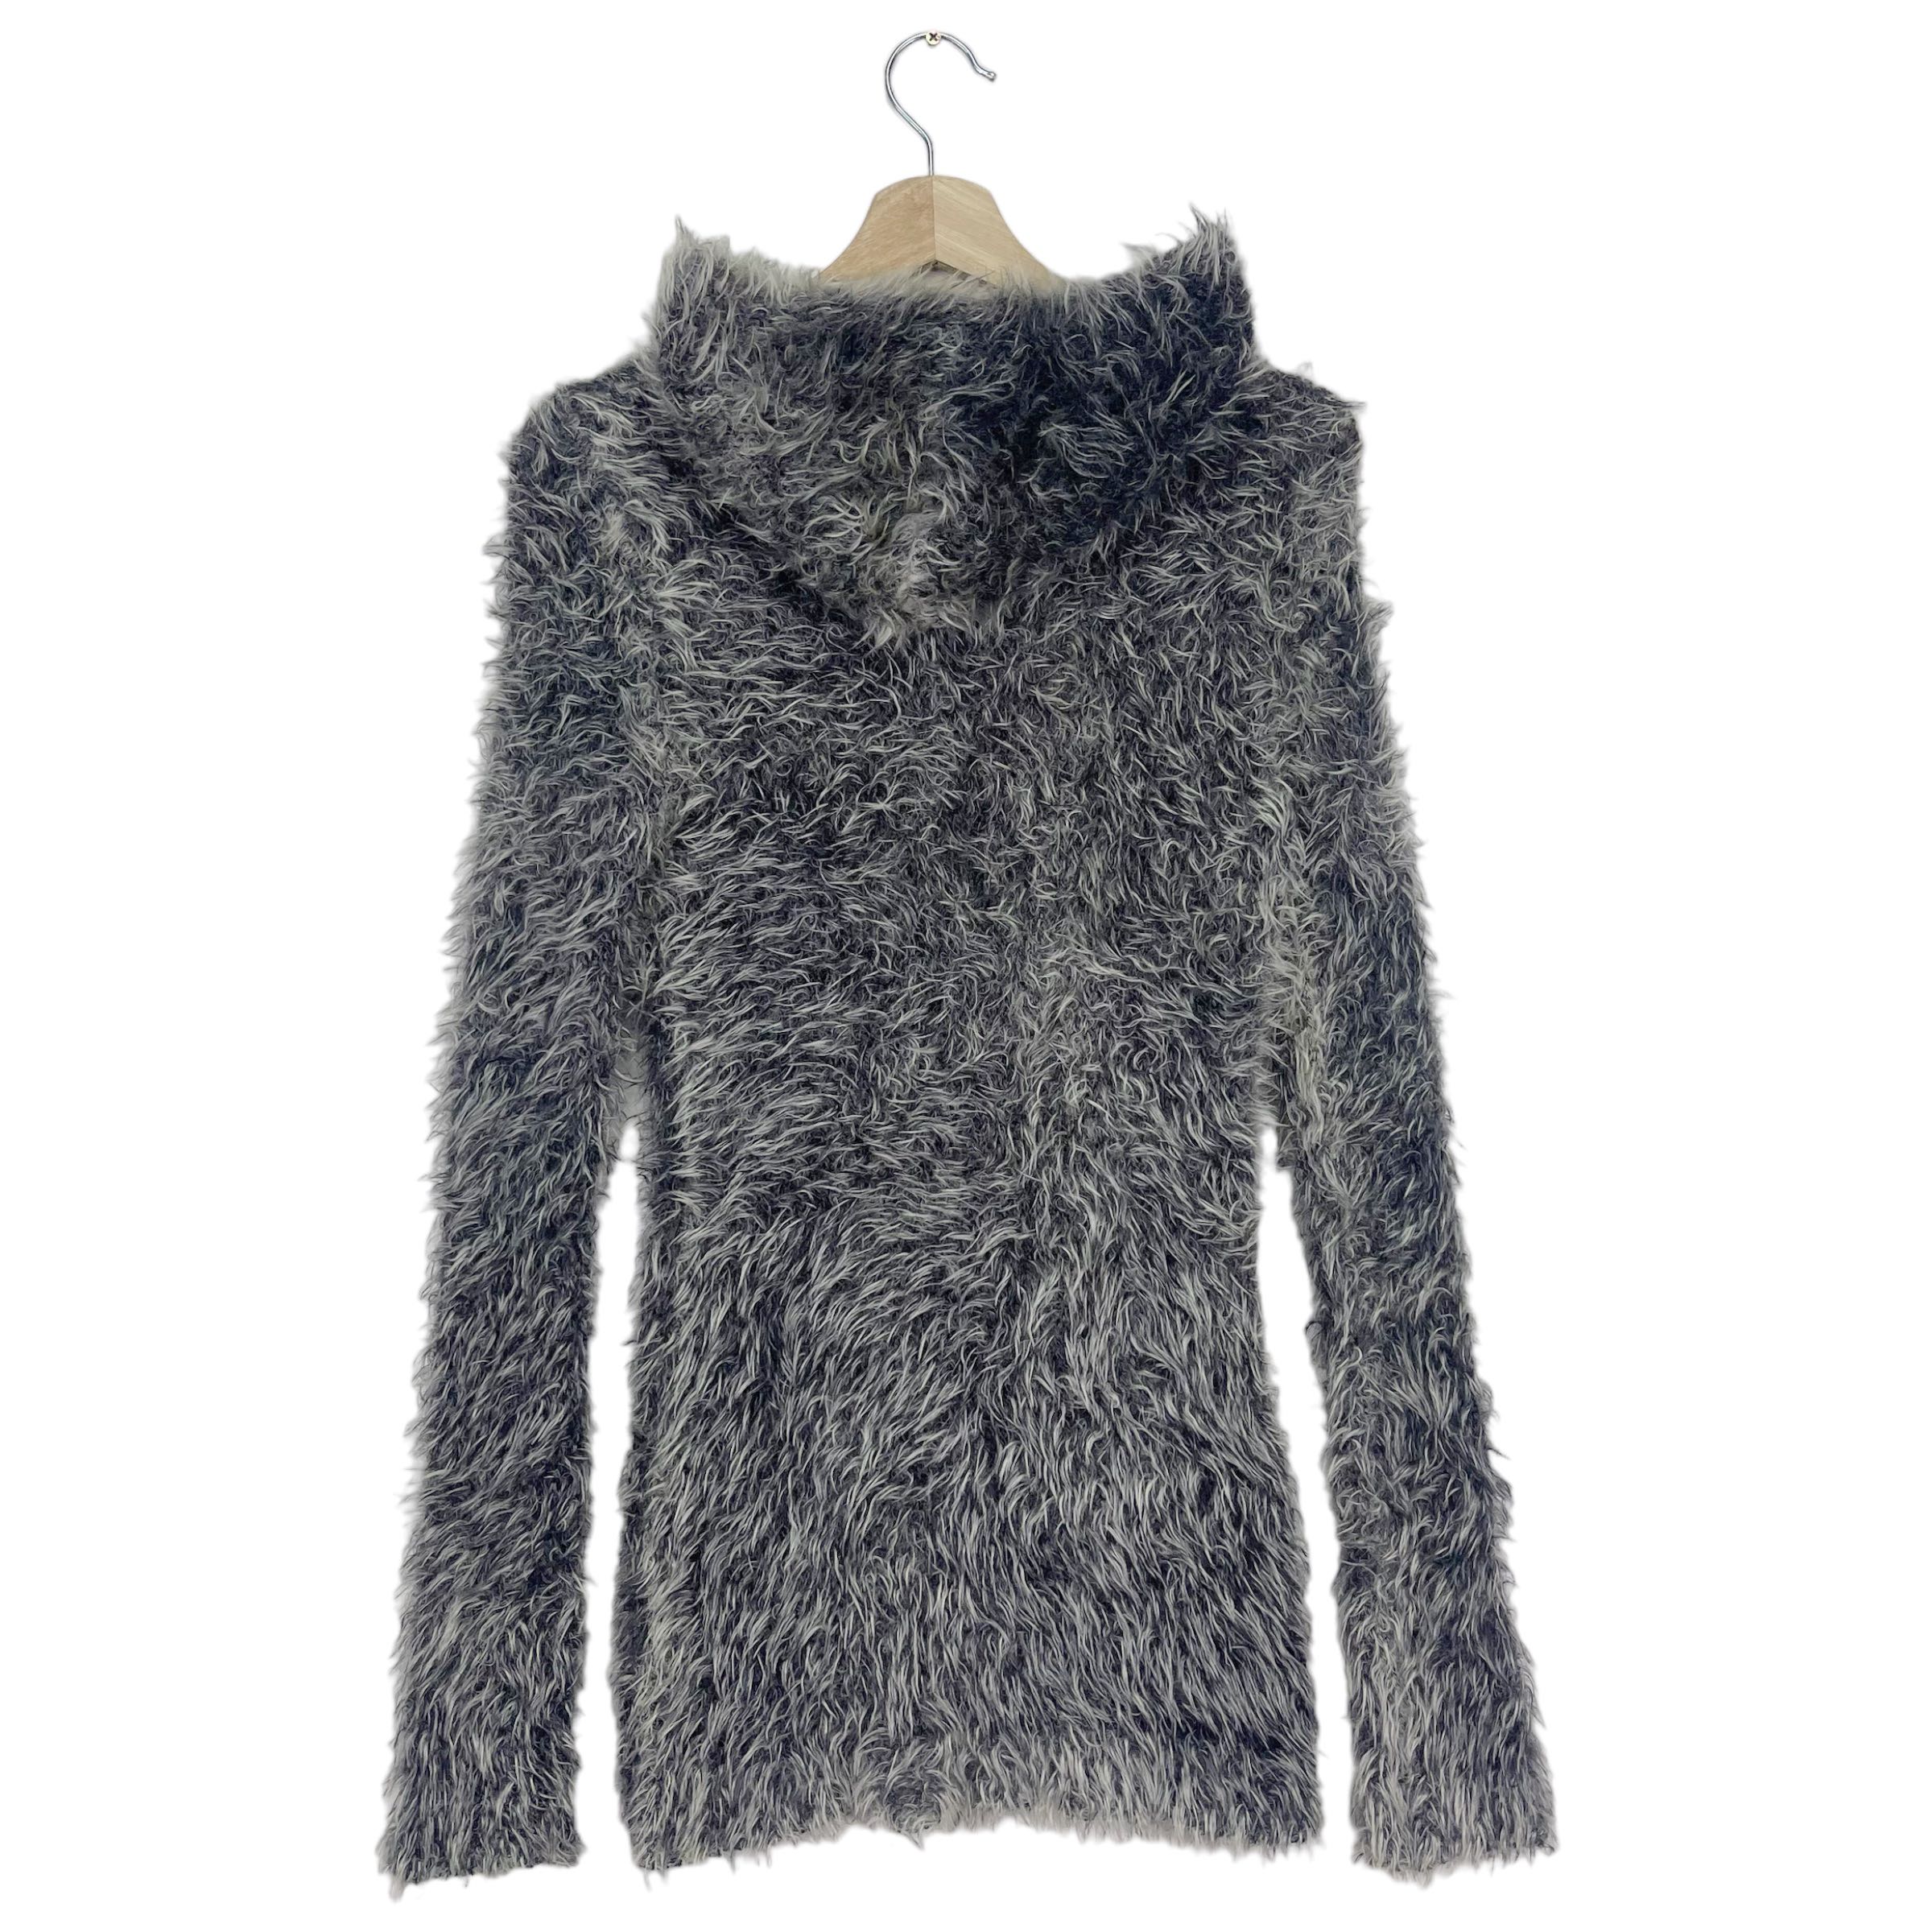 Hysteric Glamour Mohair Fuzzy Sweater - 3